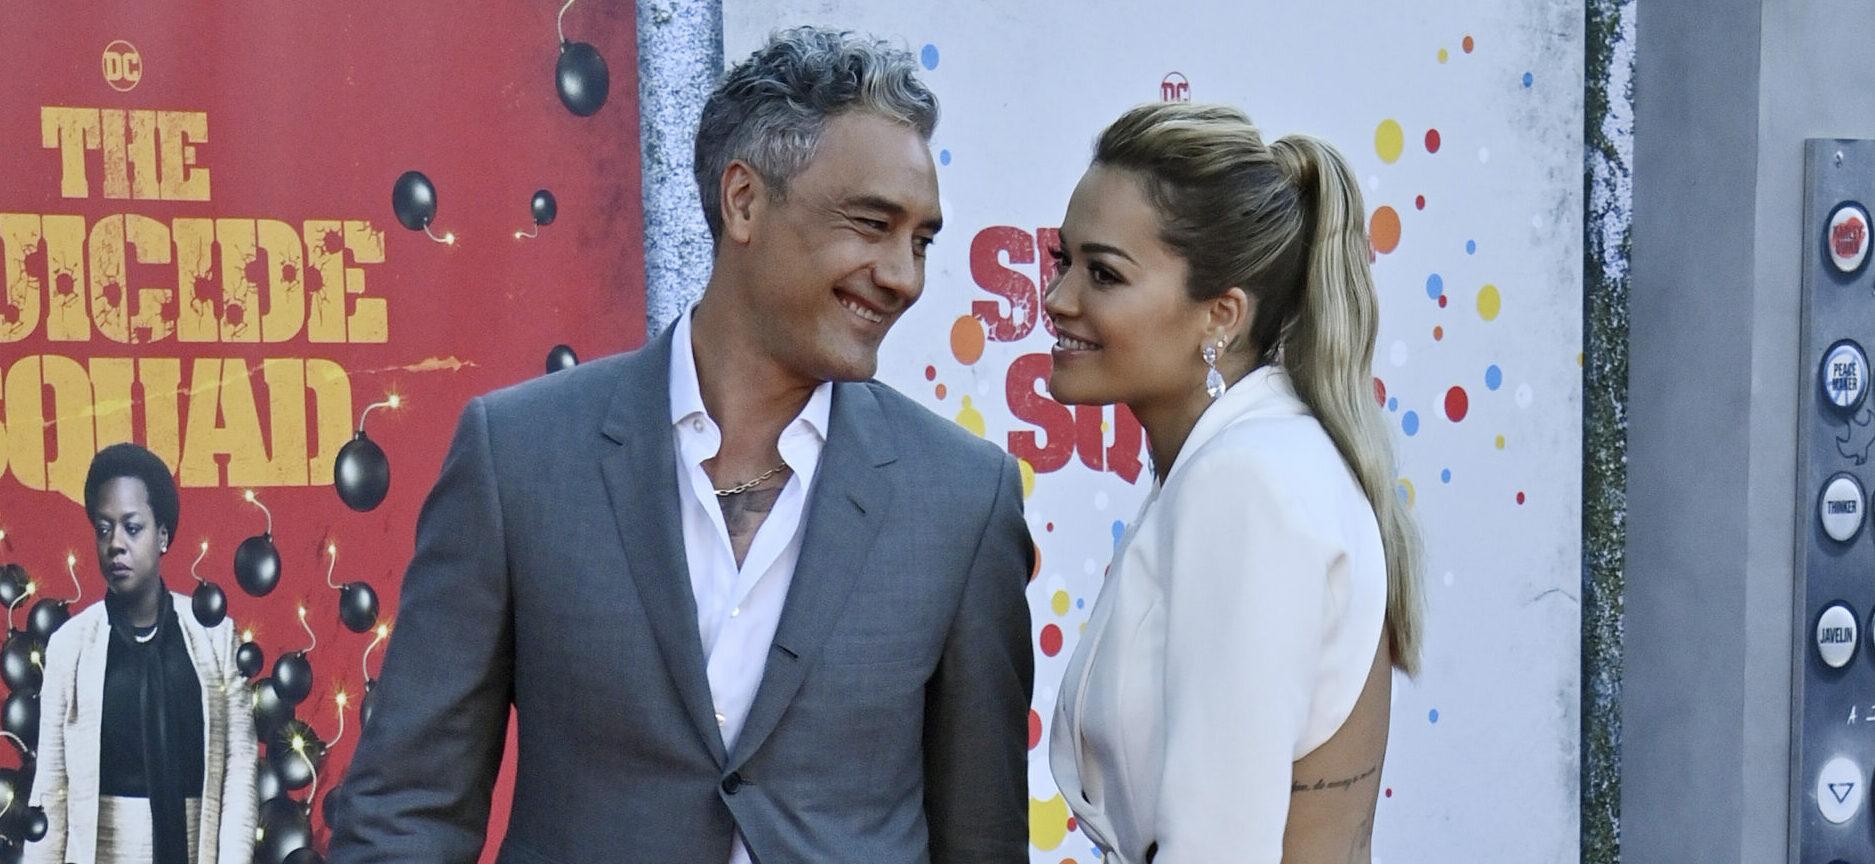 Rita Ora Reveals She And Taika Waititi Fought While He Directed Her New Music Video